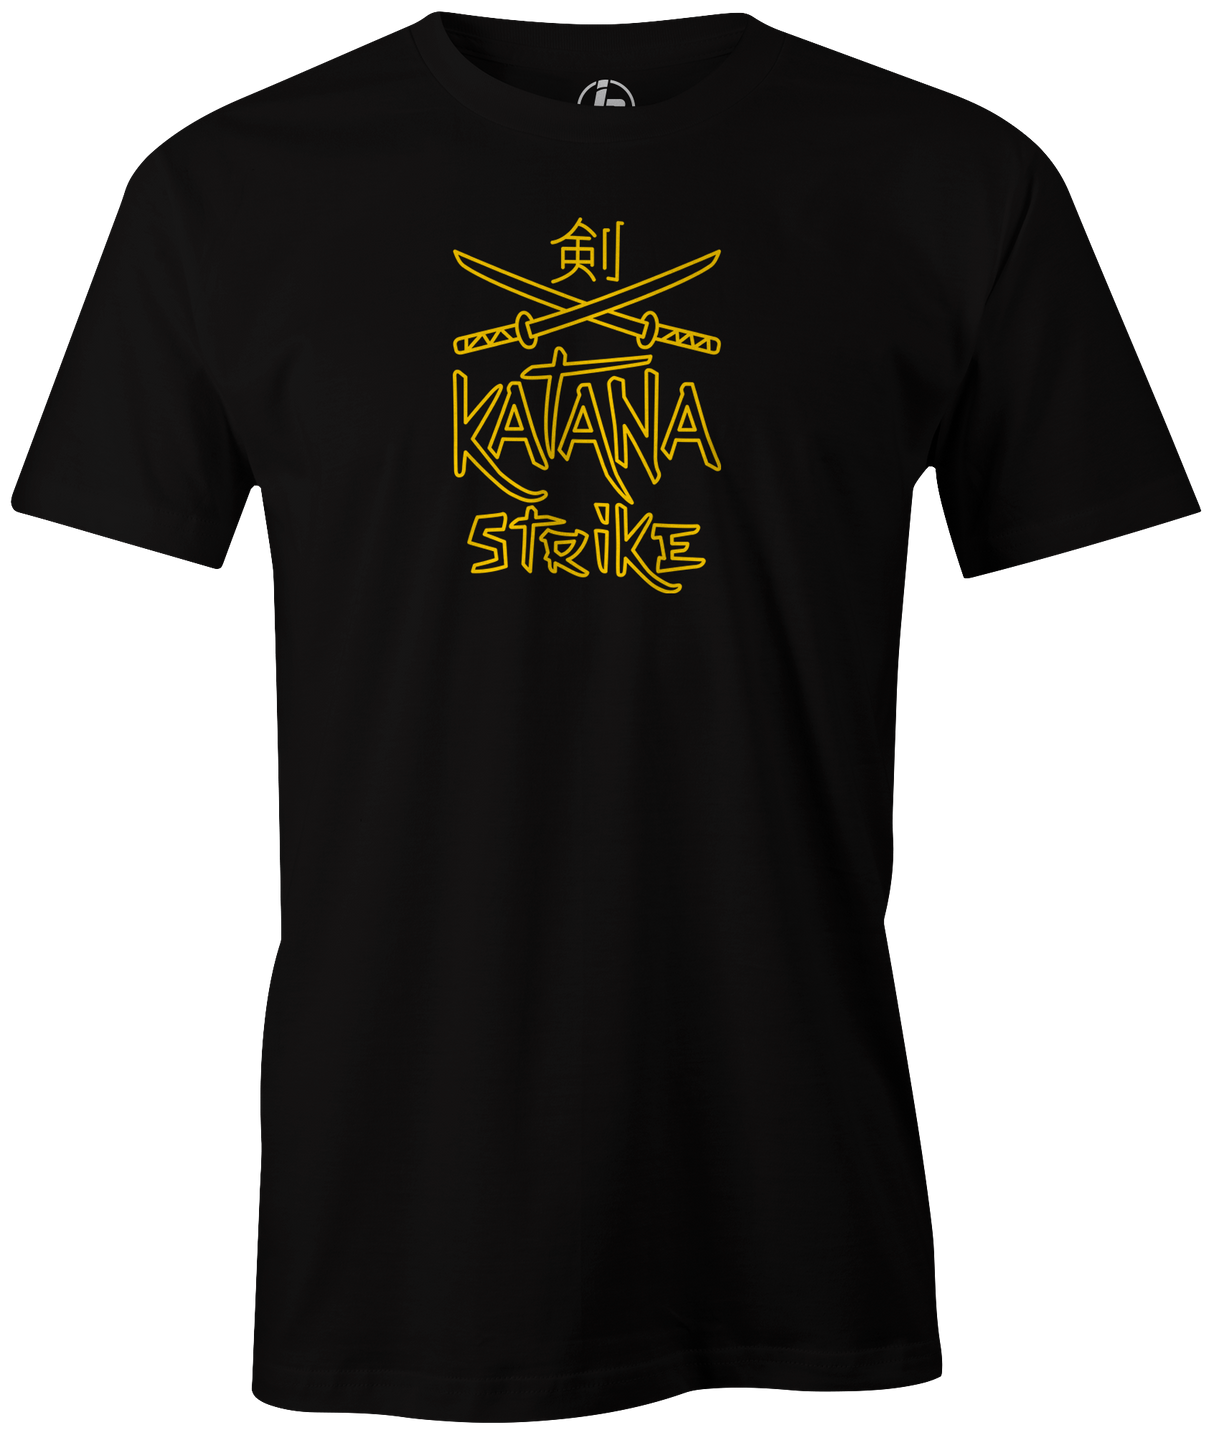 Check out this Radical Technologies Katana Strike bowling league tee (t-shirt, tees, tshirt, teeshirt) available at Inside Bowling. Comfortable cheap discounted special bowling shirts for bowlers online. Get what you can't get on Amazon, Walmart, Target, or E-Bay here. Men's T-Shirt, Purple, bowling, bowling ball, tee, tee shirt, tee-shirt, t shirt, t-shirt, tees, league bowling team shirt, tournament shirt, funny, cool, awesome, brunswick, brand